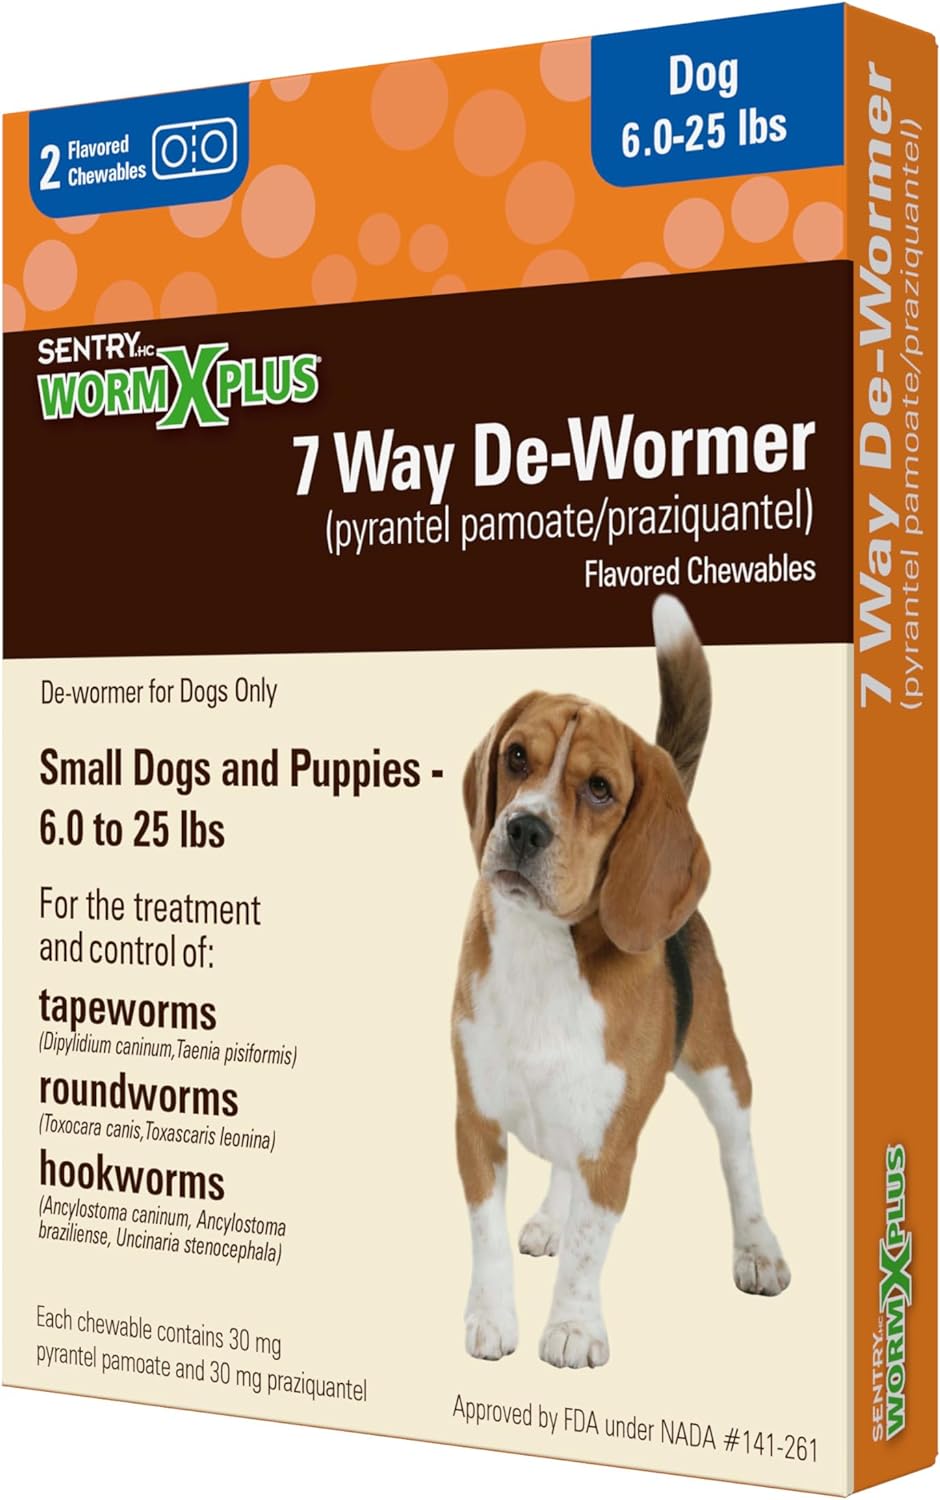 HC Worm X Plus 7 Way De-Wormer (pyrantel pamoate/praziquantel), for Puppies and Small Dogs, 6-25 lbs, Chewable, 2 Count